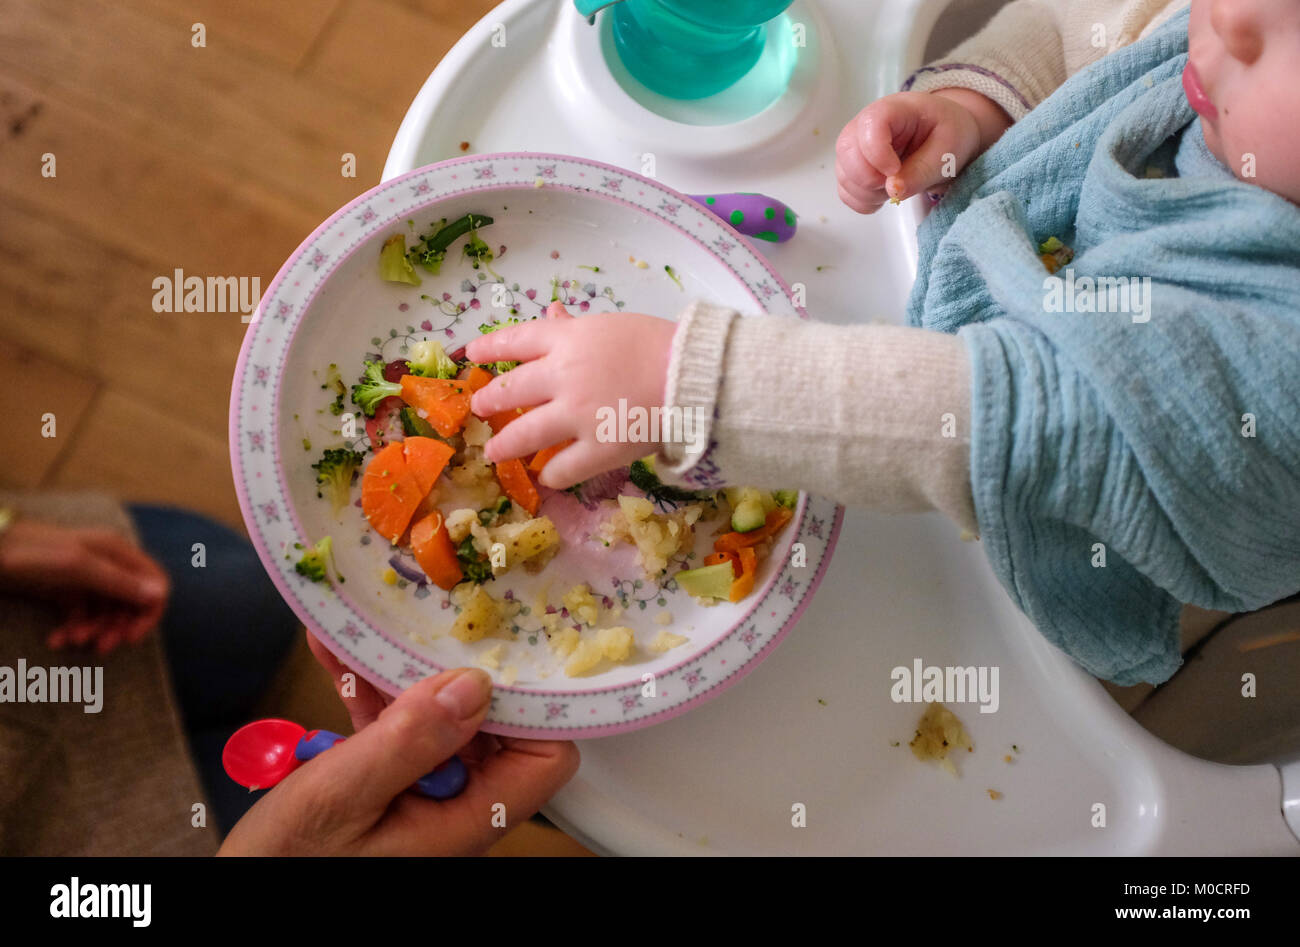 Young baby 1 year old girl toddler eating healthy lunch food of vegetables and fish with her grandmotther Stock Photo